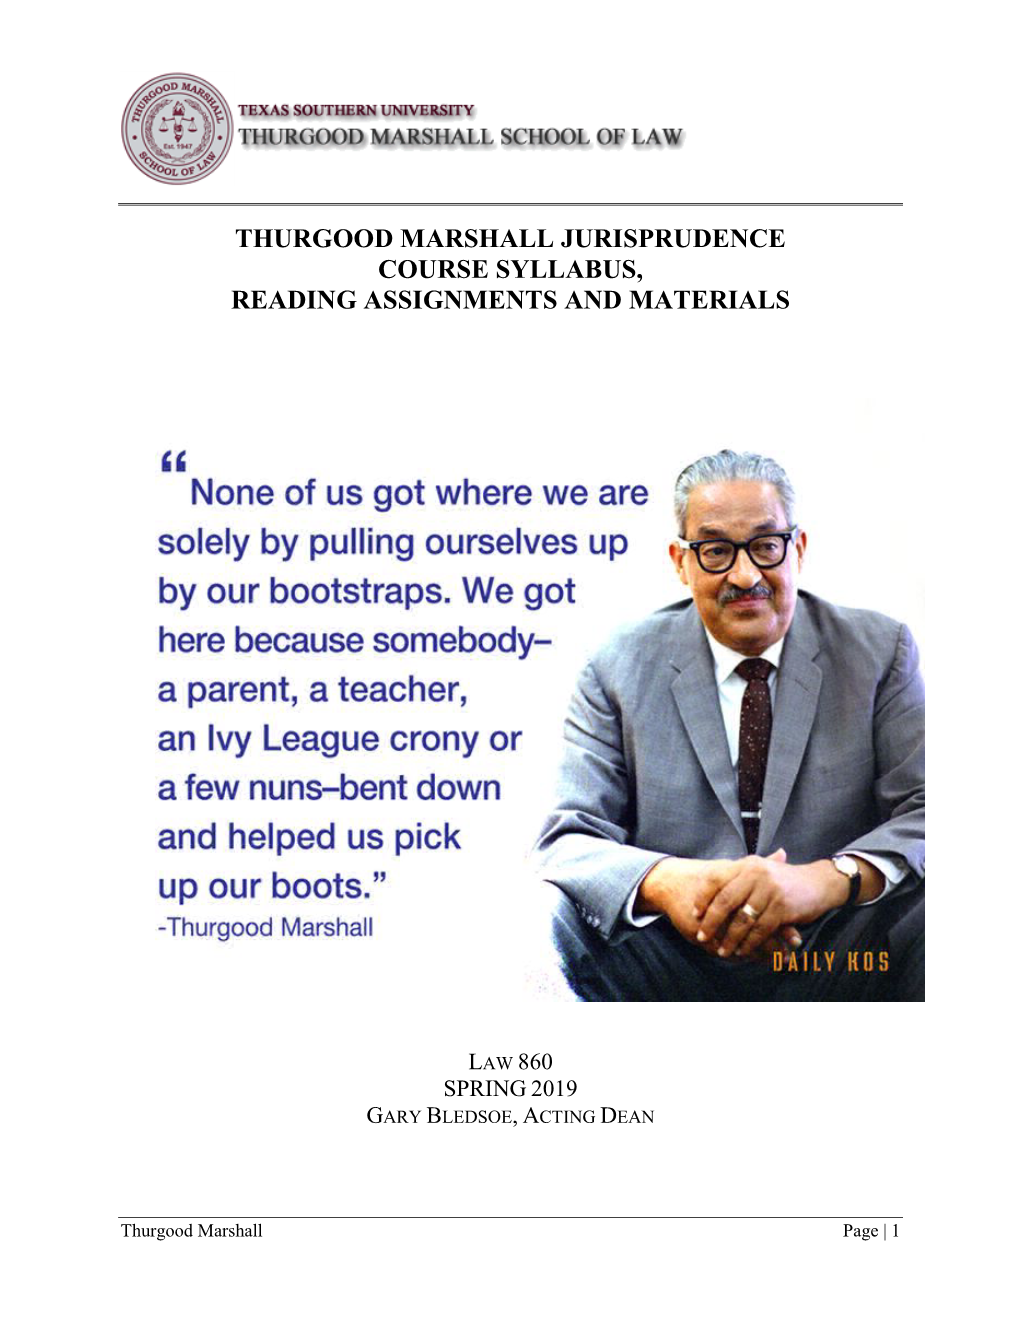 Thurgood Marshall Jurisprudence Course Syllabus, Reading Assignments and Materials